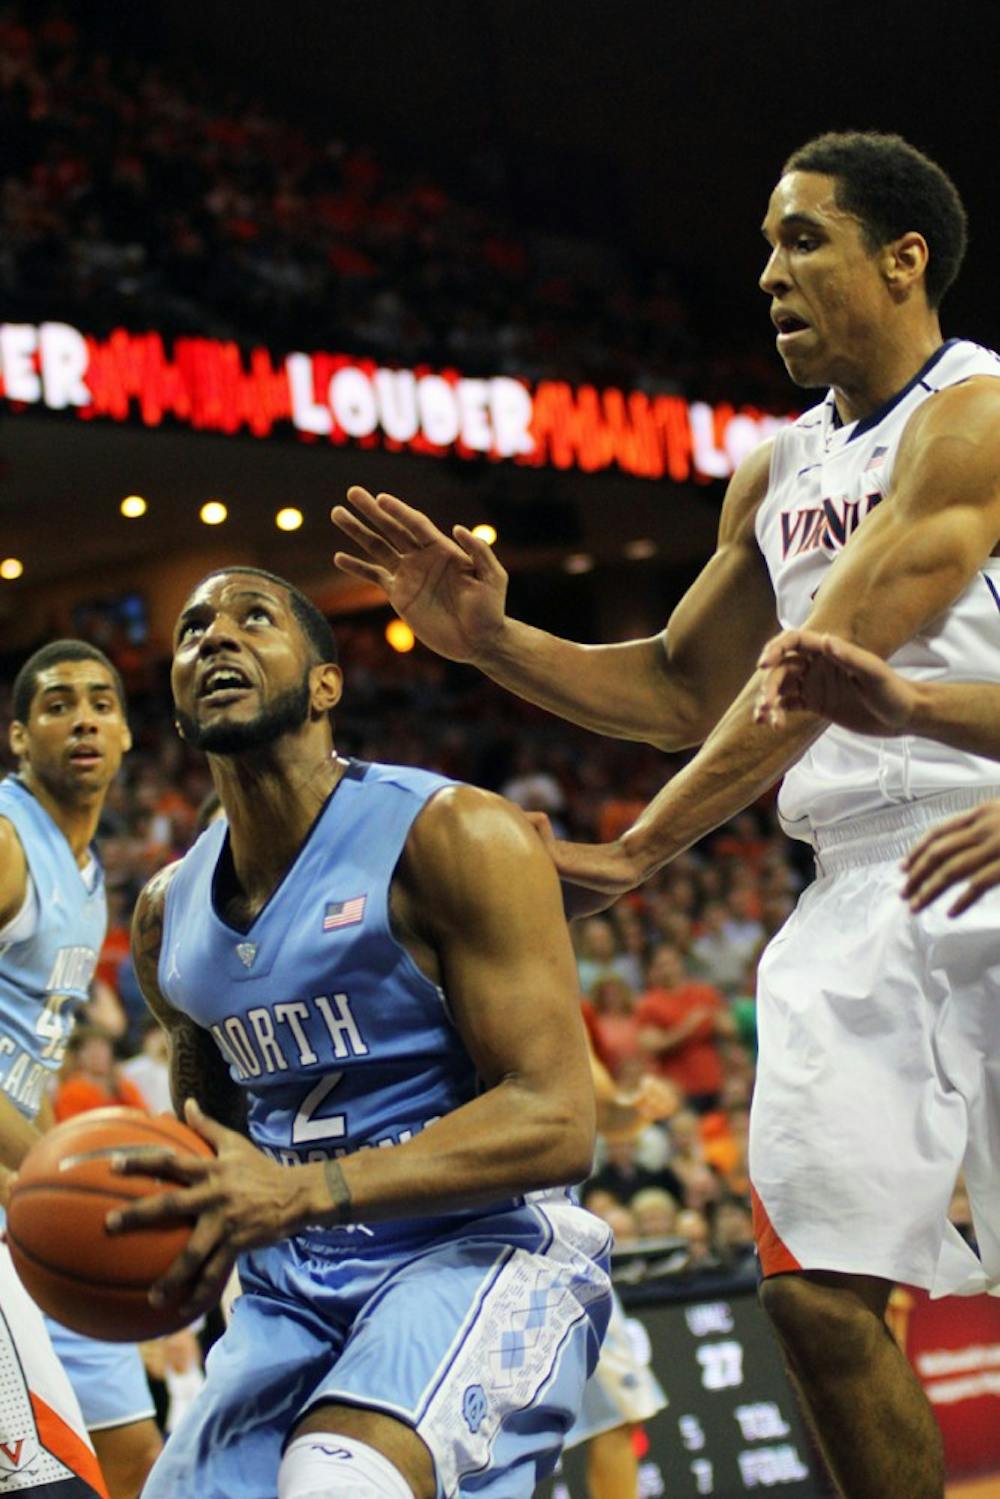 	The Tar Heels were defeated by Virginia 76-61 Monday January 20 in Charlottesville, VA.